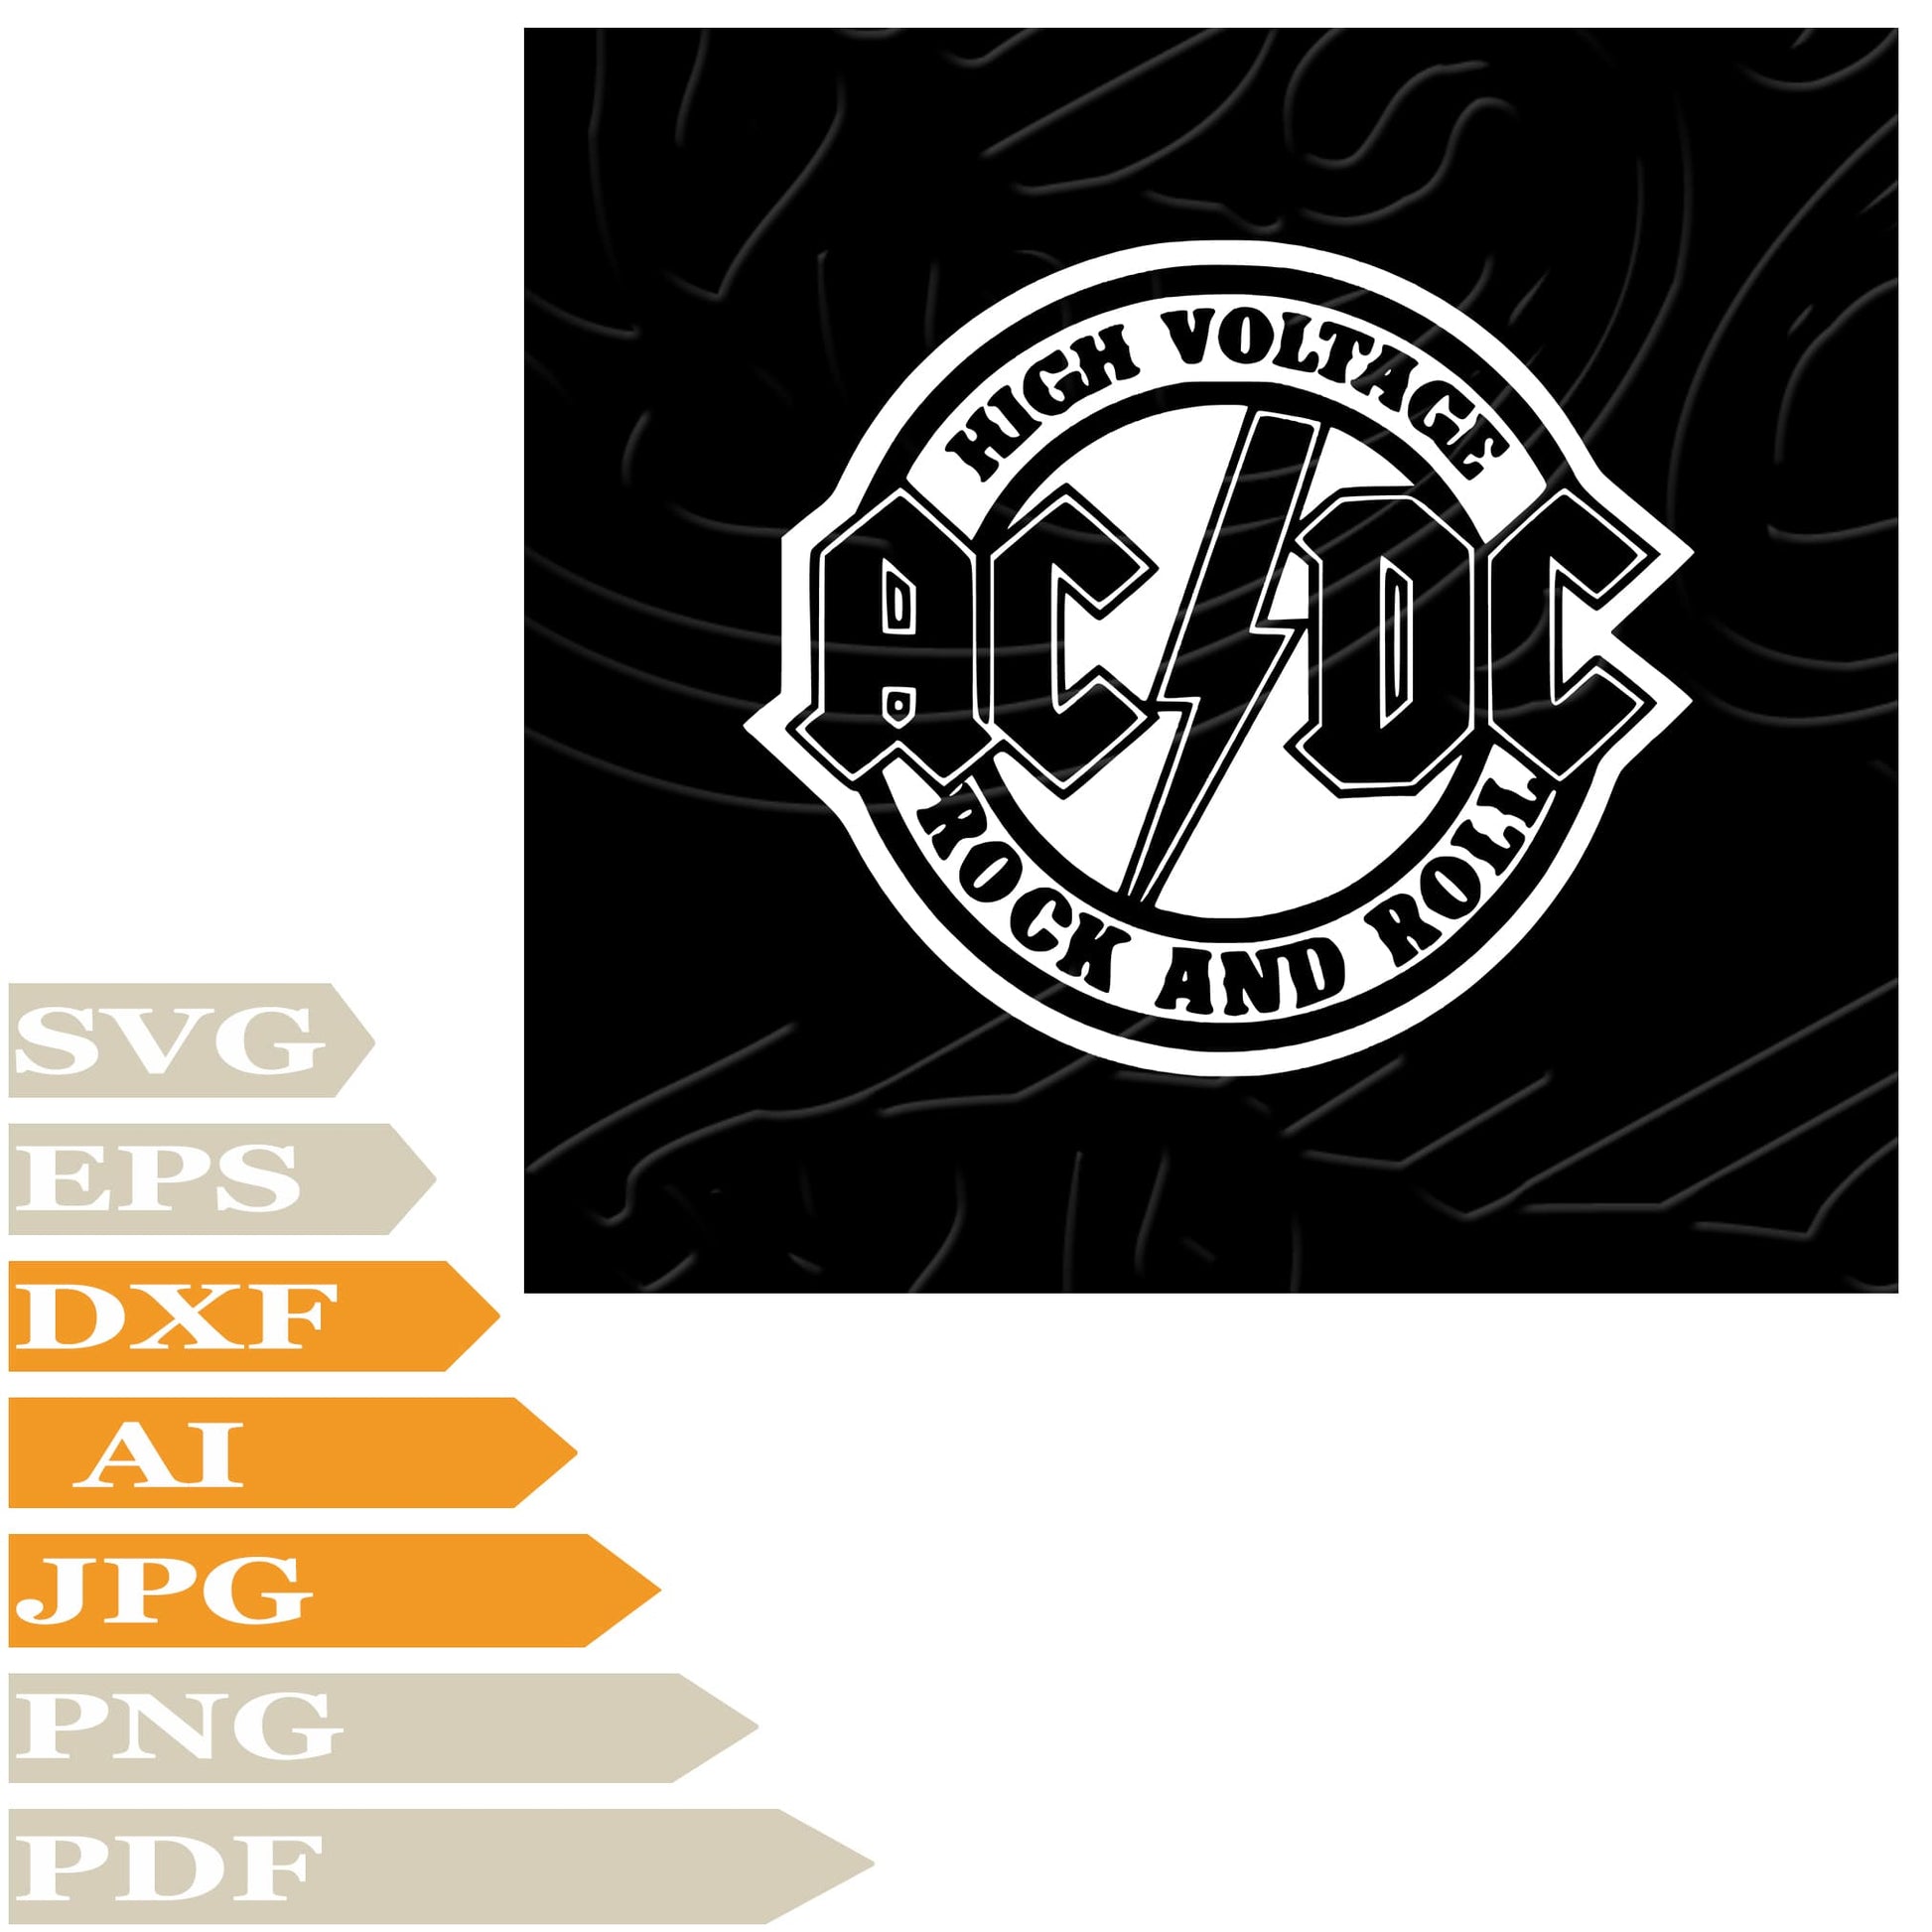 AC/DC SVG, AC/DC Rock Band SVG Design, AC/DC Logo Vector Graphics, AC/DC Logo For Cricut, For Tattoo, Clip Art, Cut File, T-Shirts, Silhouette, All Available